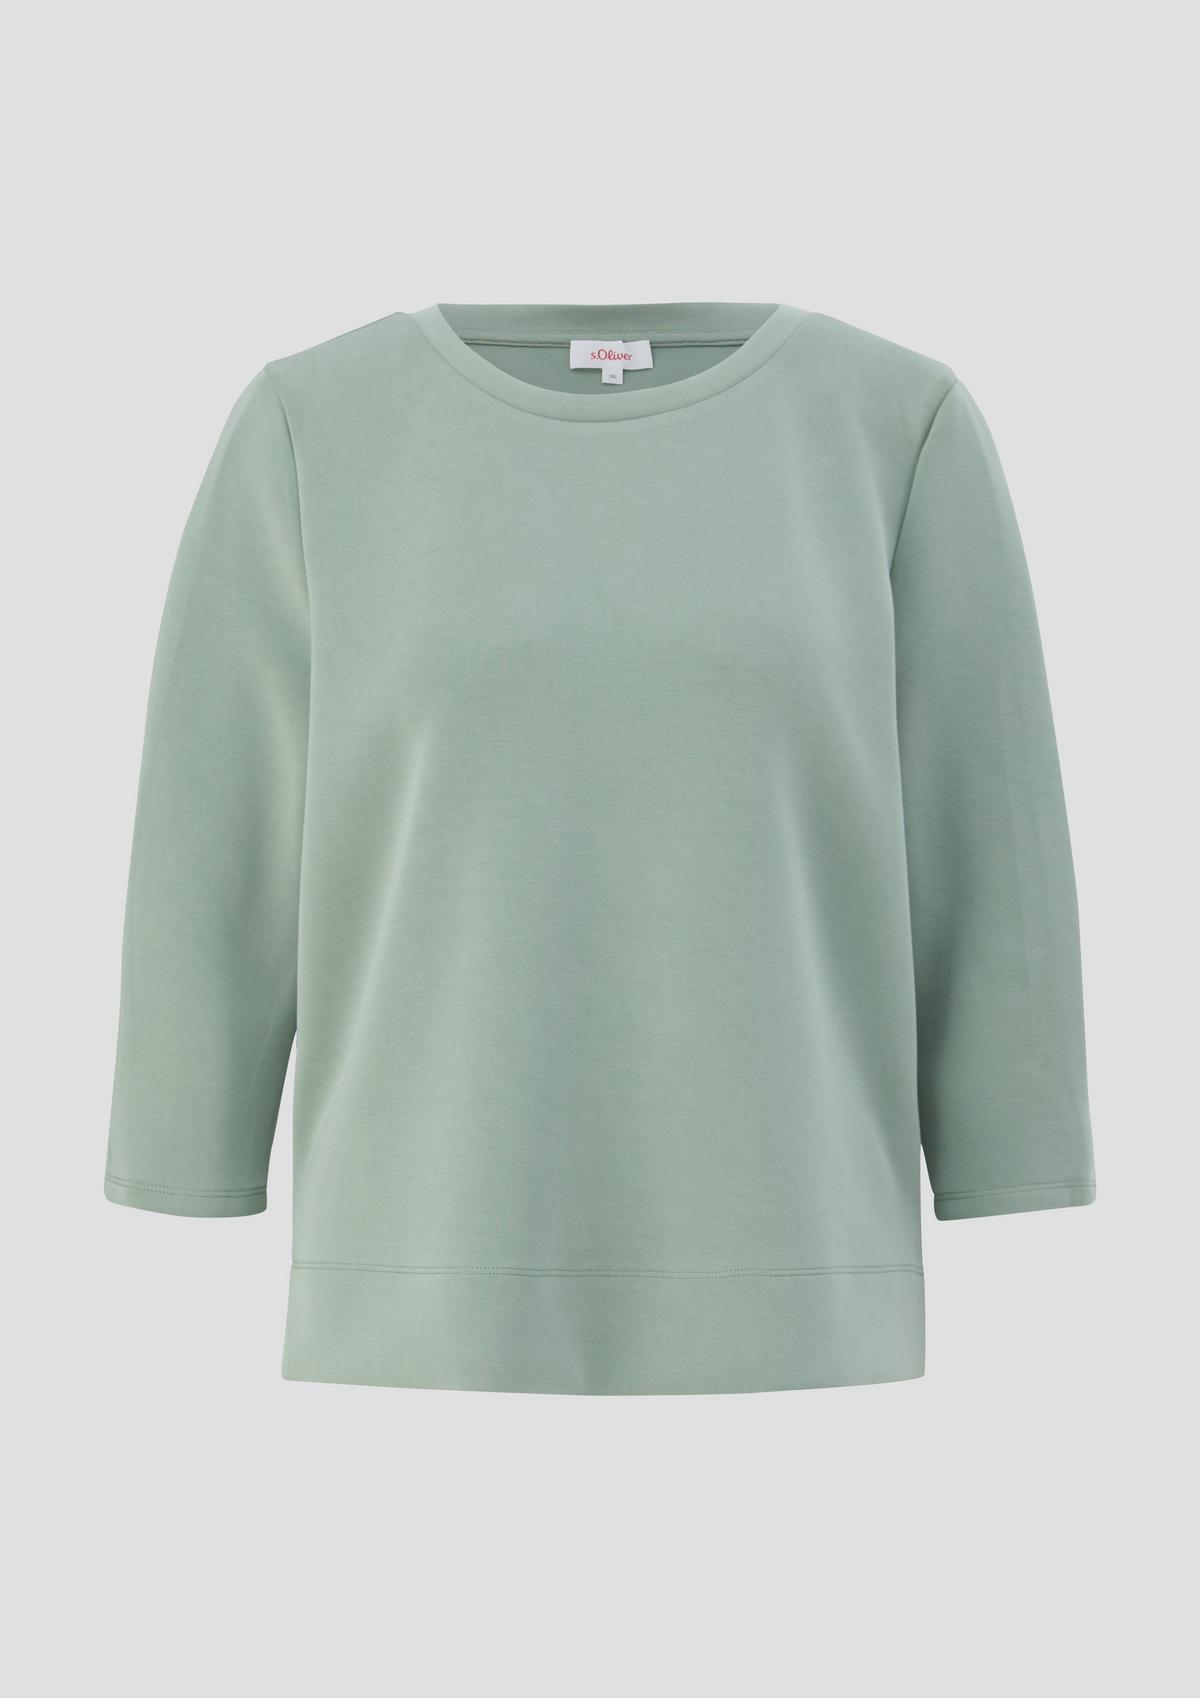 s.Oliver Scuba sweatshirt with a pleat